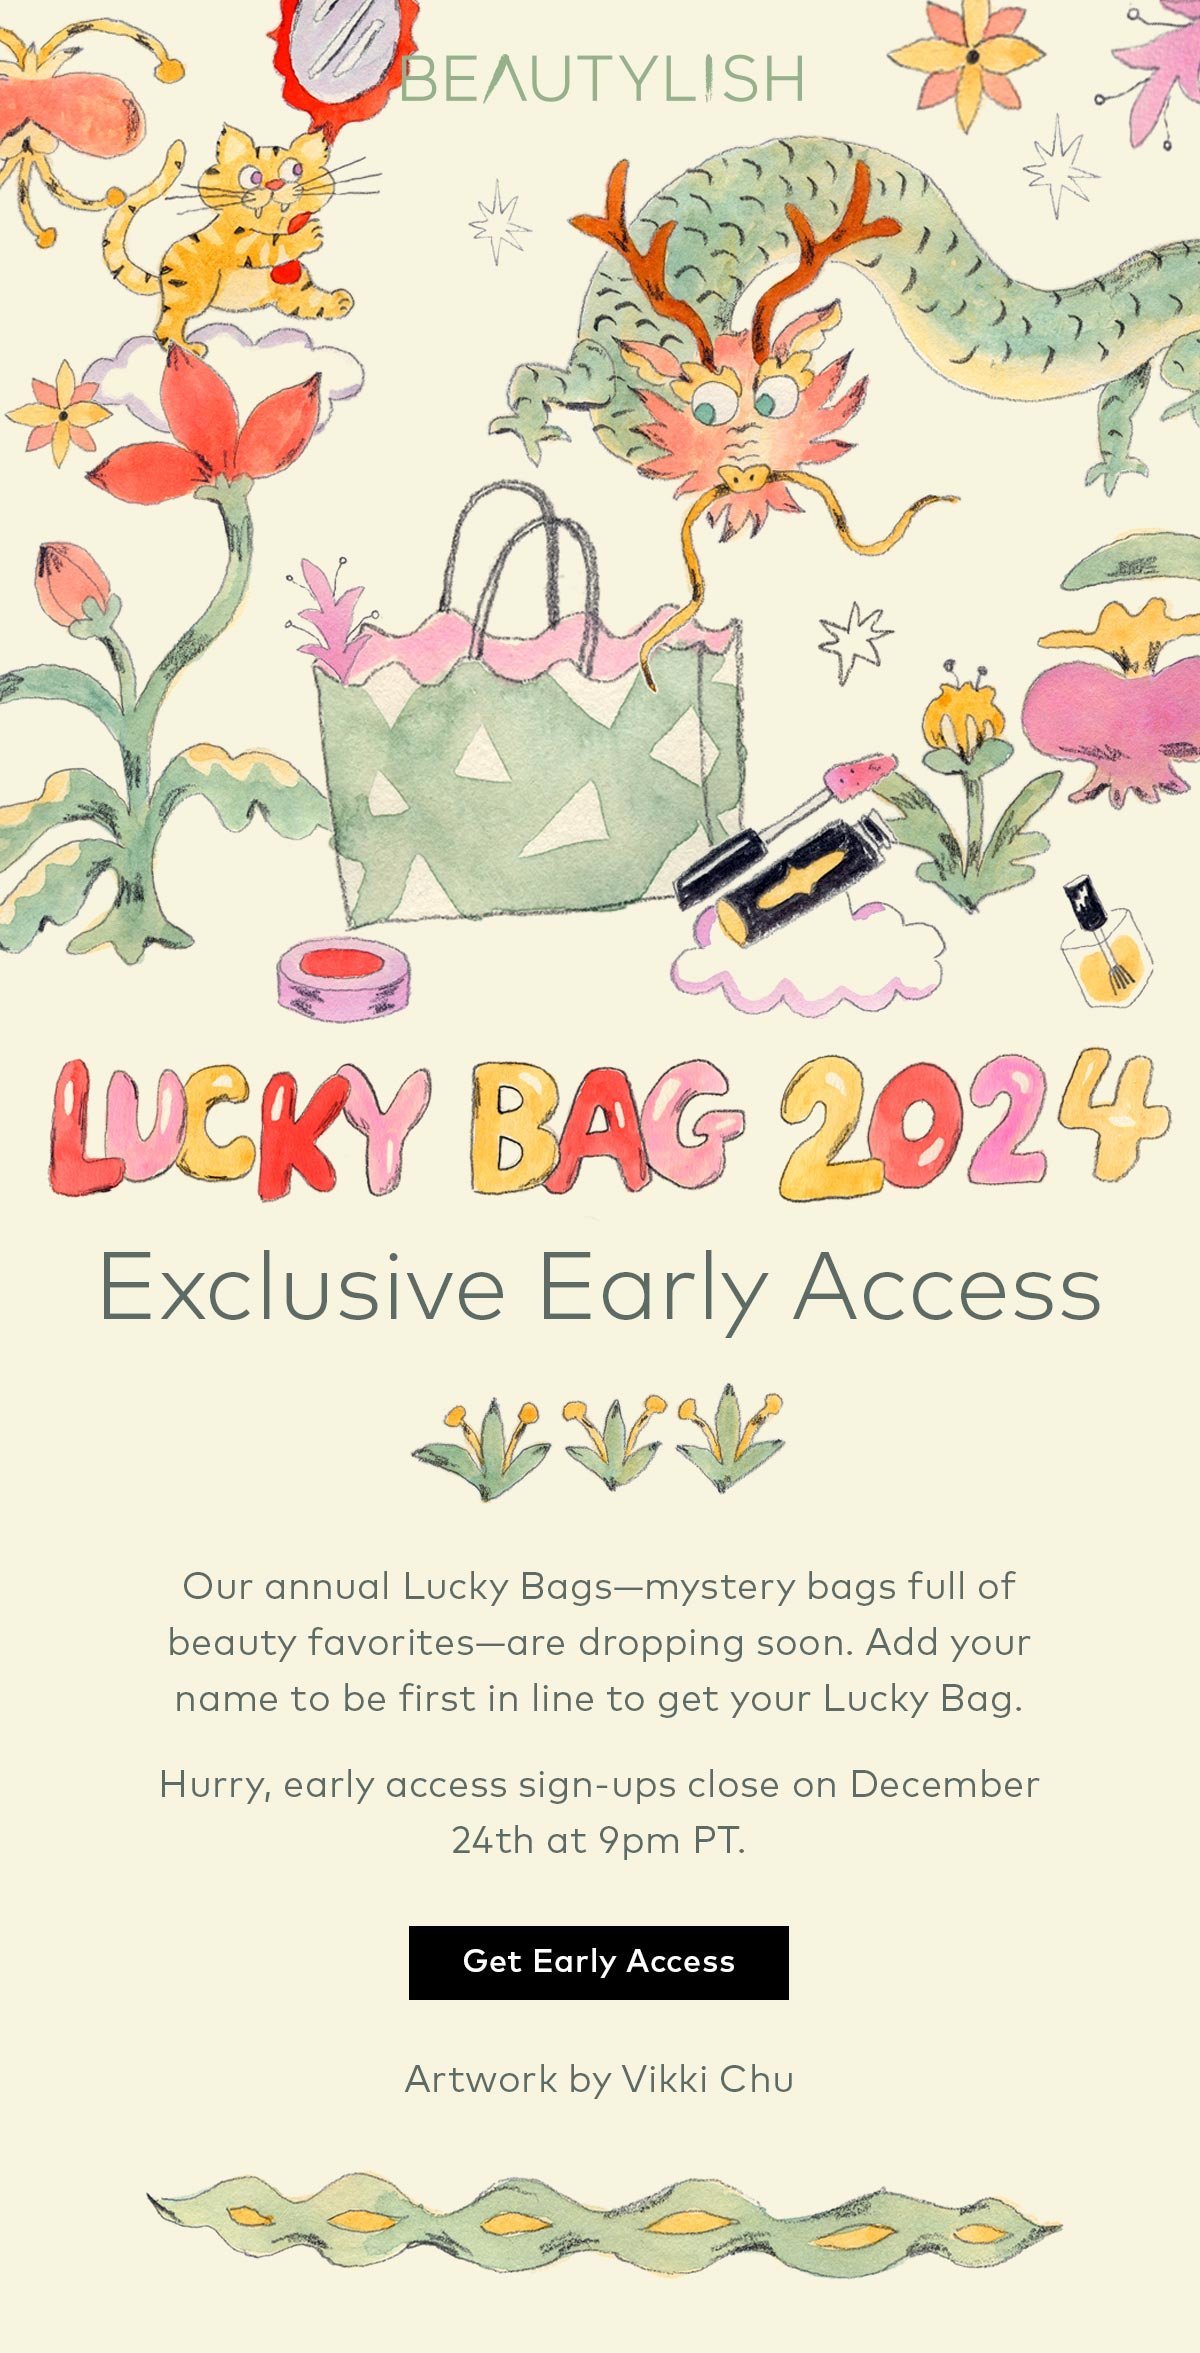 Here’s your last chance to get Lucky Bag Early Access. Sign up here.